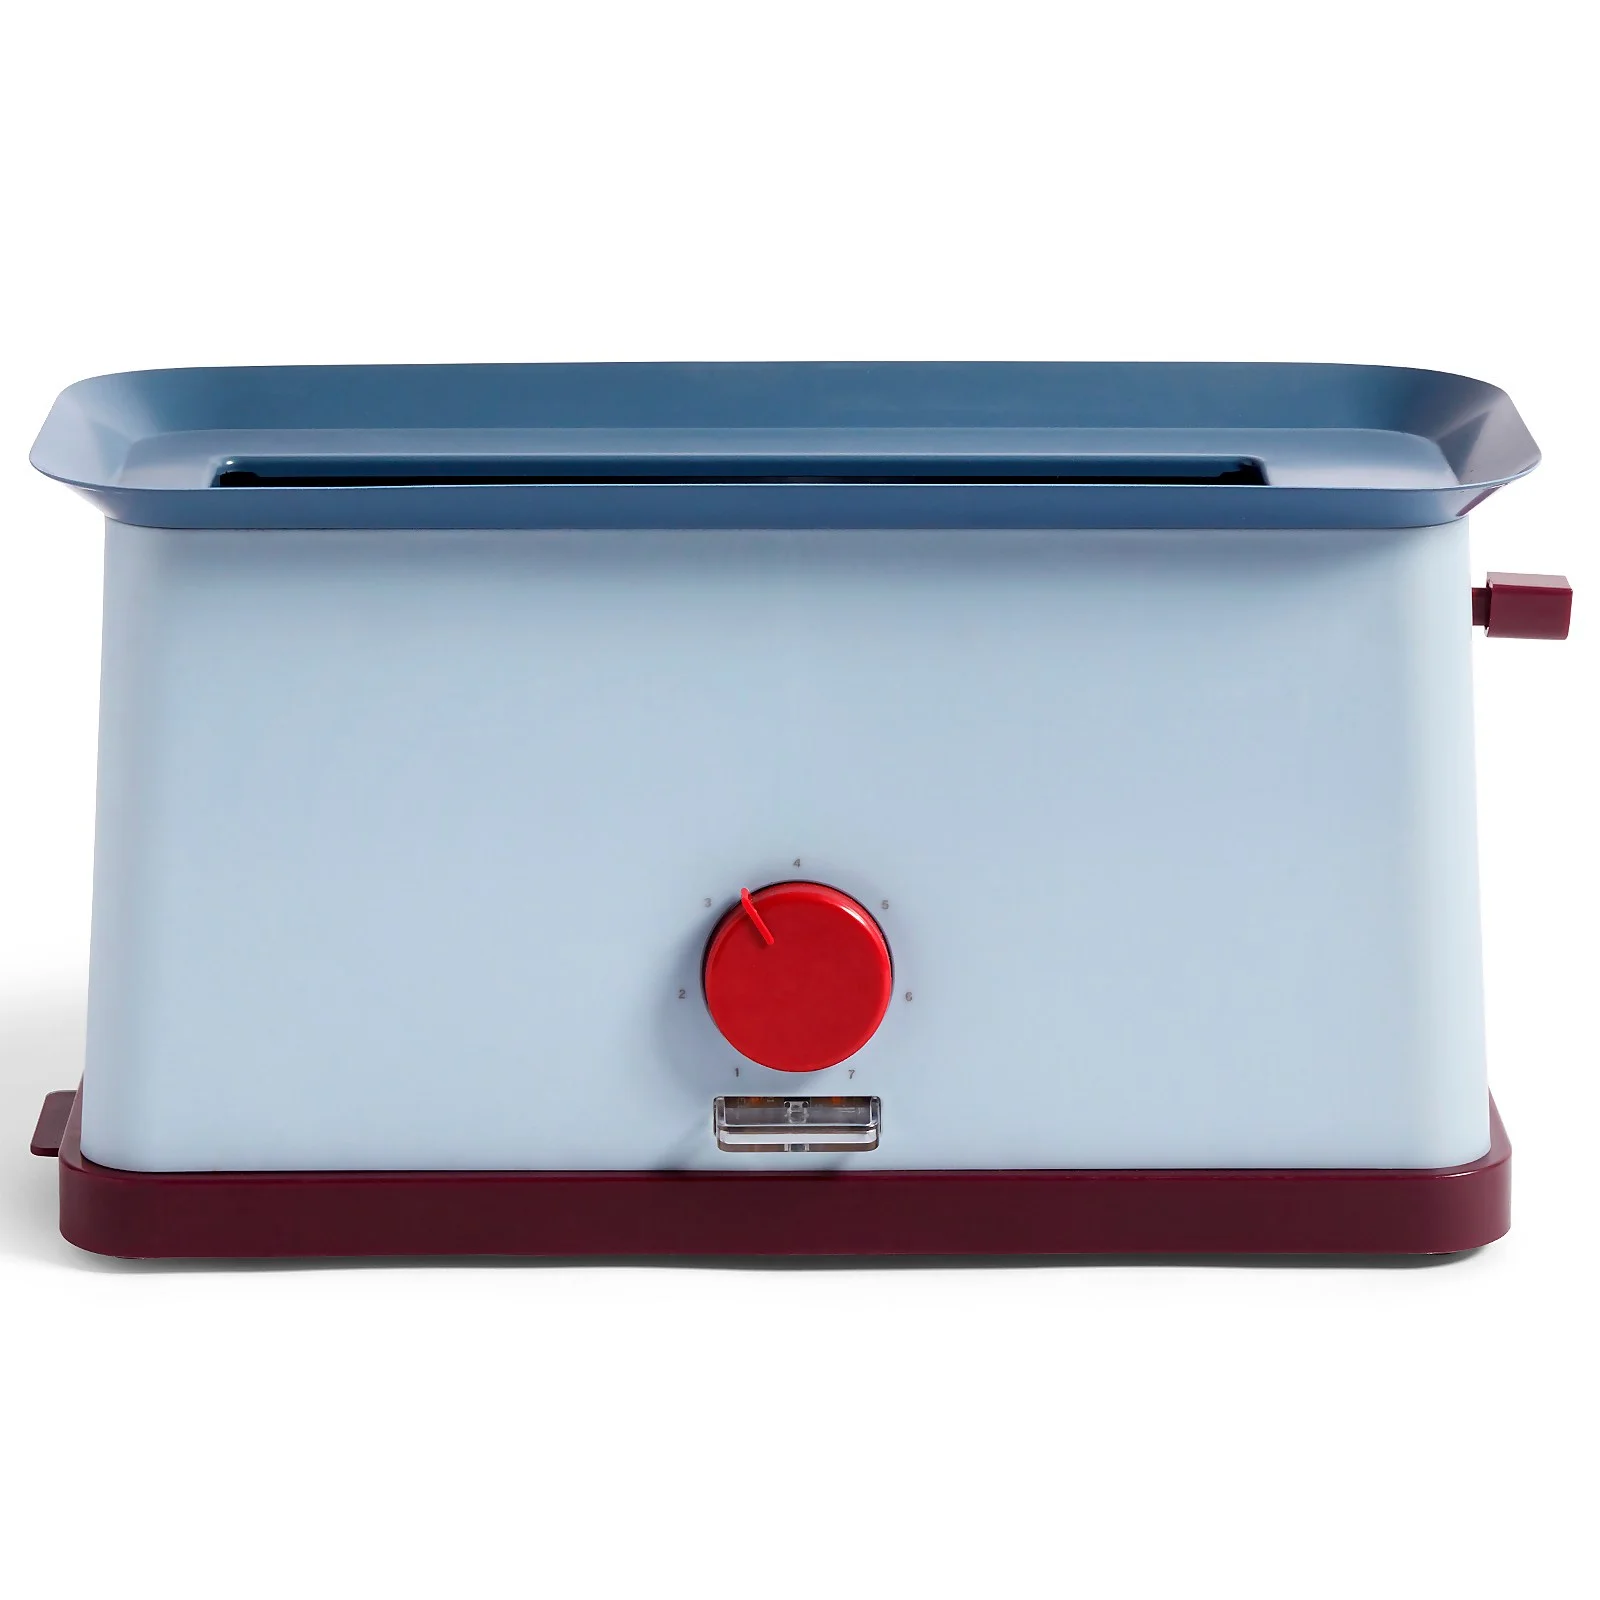 HAY Sowden Toaster - Blue Image 1